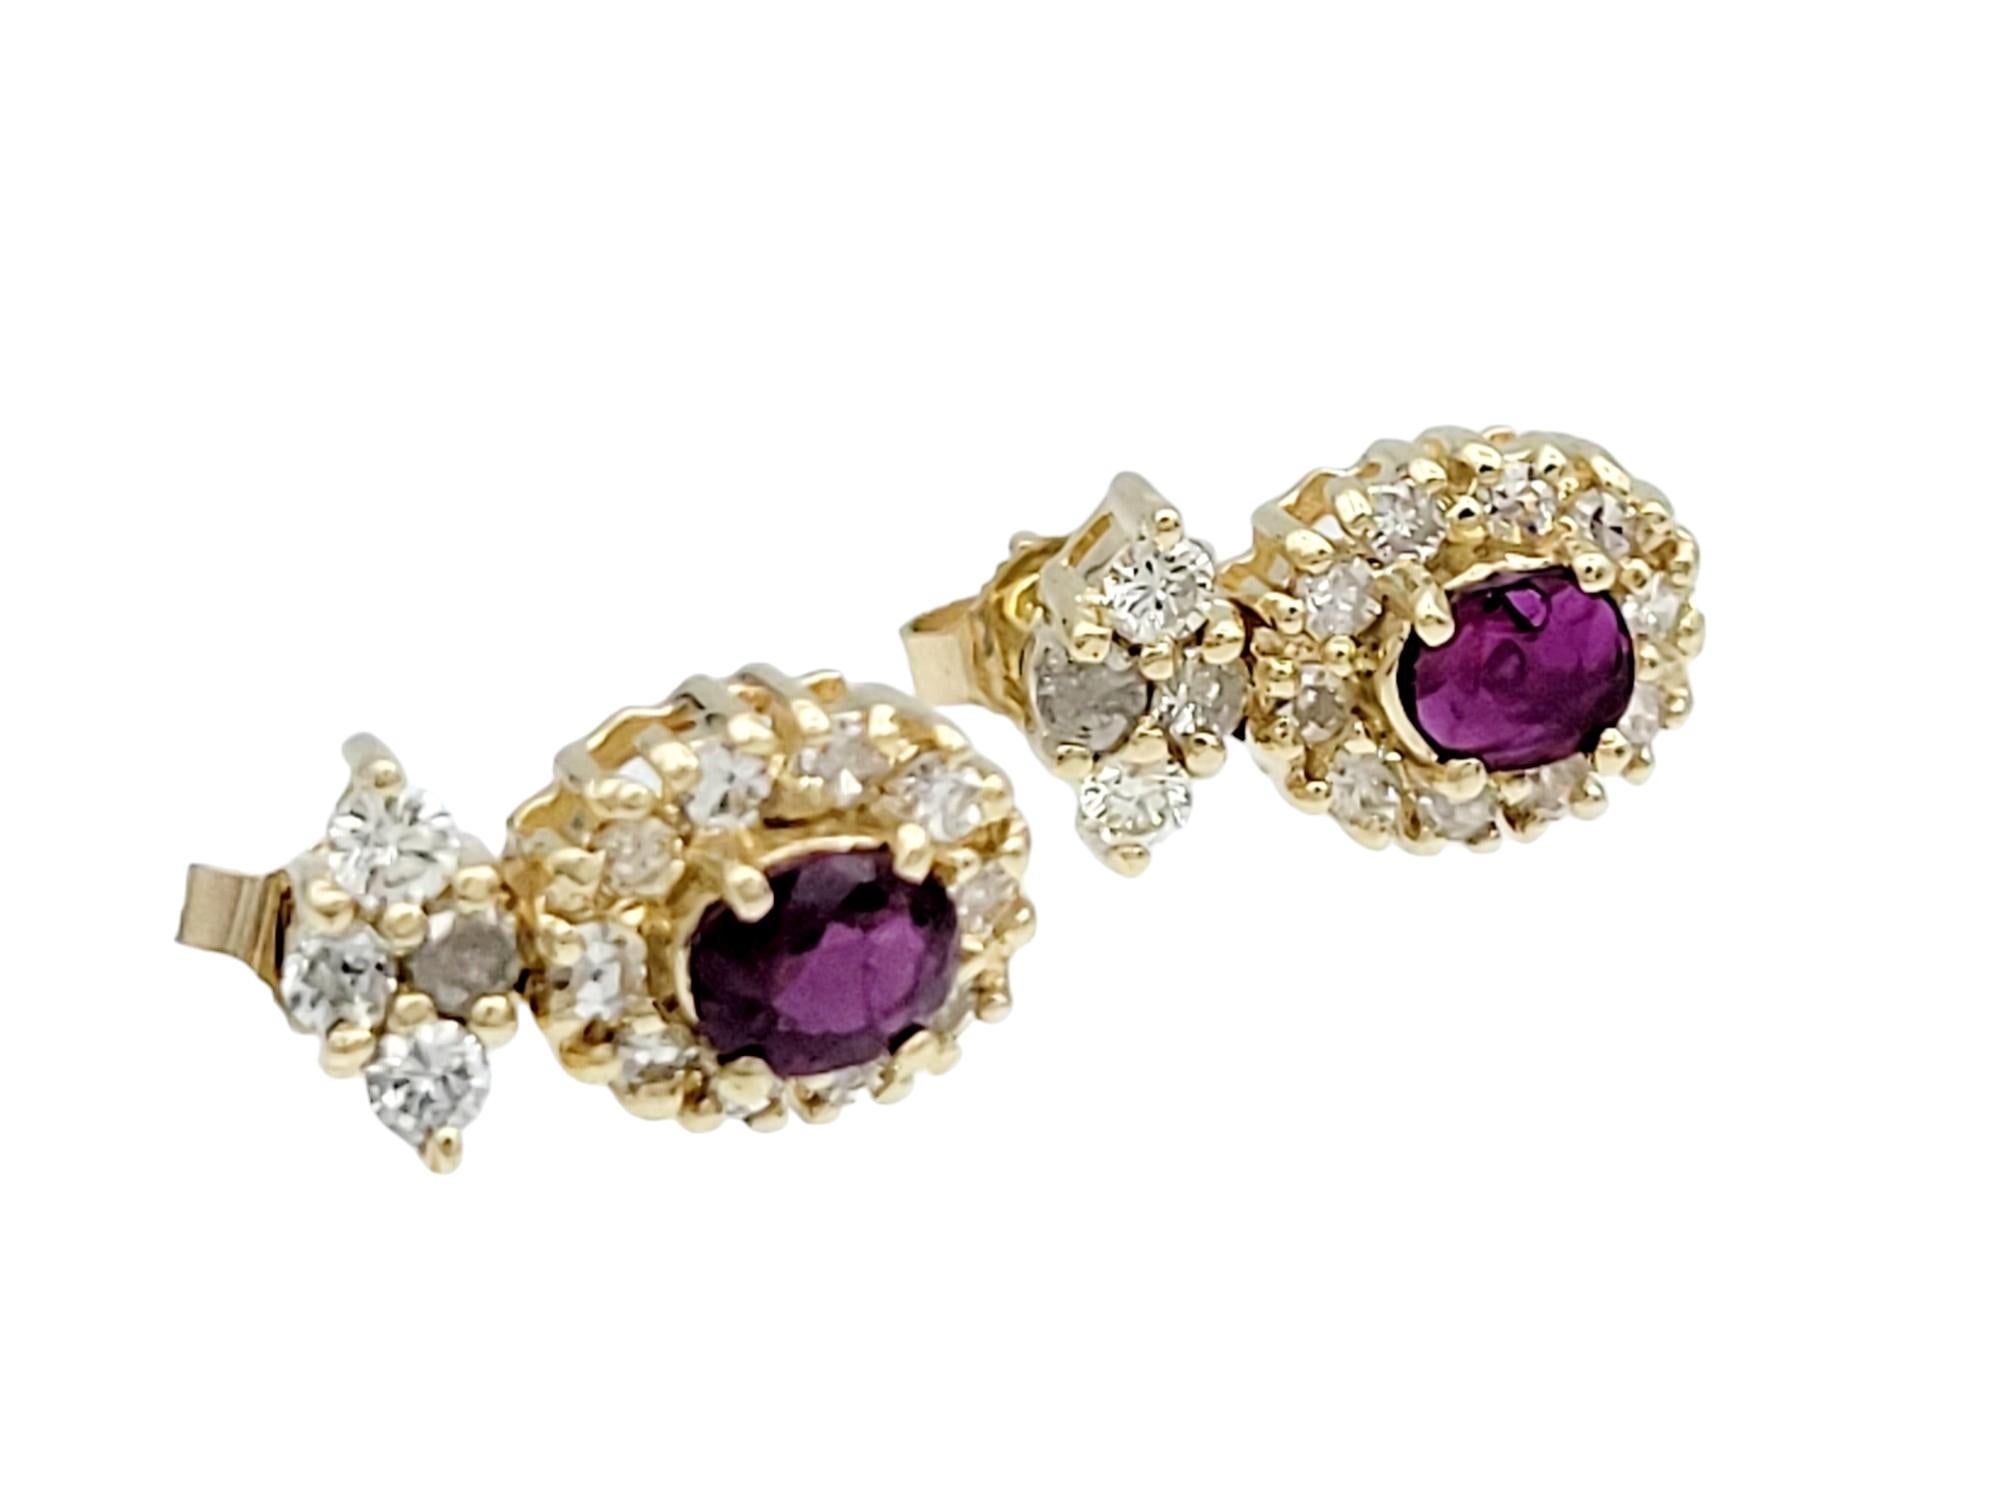 These stud earrings, set in radiant 14 karat yellow gold, are a captivating expression of classic elegance. The focal point of each earring is a lustrous oval-shaped ruby, radiating a rich and vibrant hue. Surrounding the ruby is a delicate halo of